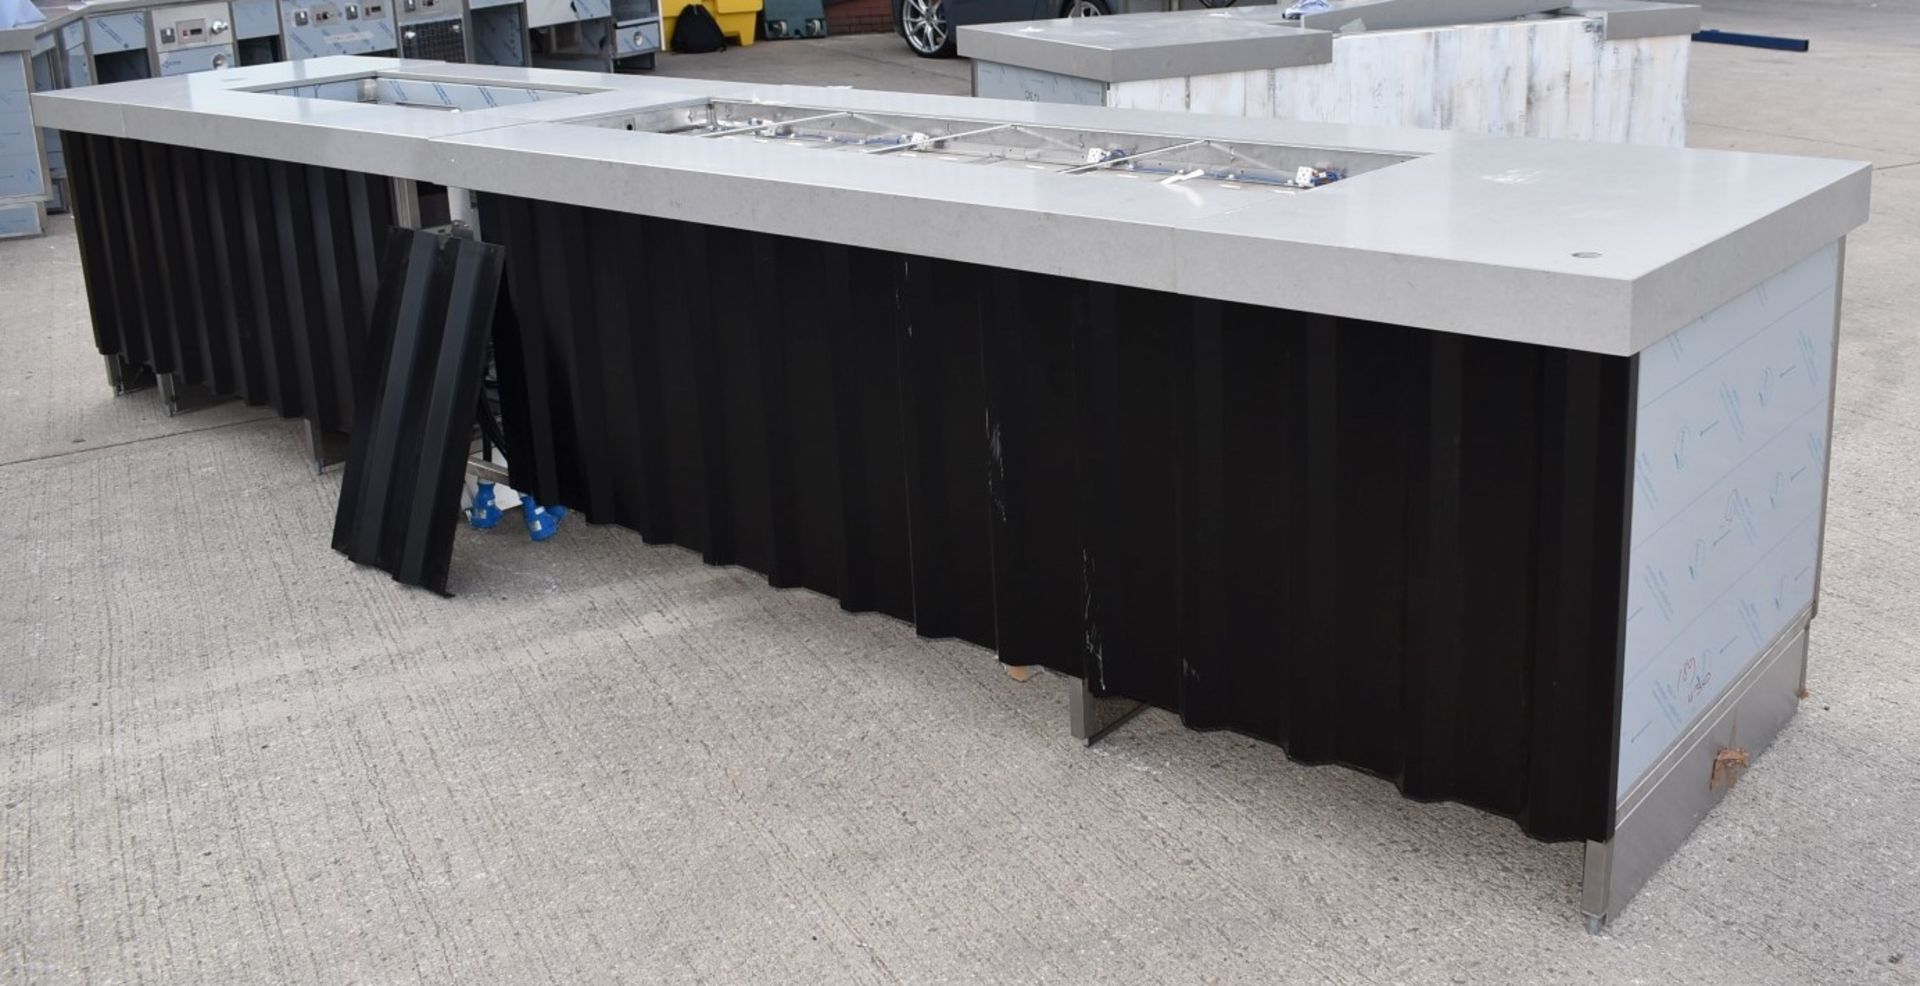 1 x Bespoke Retail Food Counter Featuring Black Wall Cladding Fascia, Granite Worktop, Cold Well, - Image 8 of 51